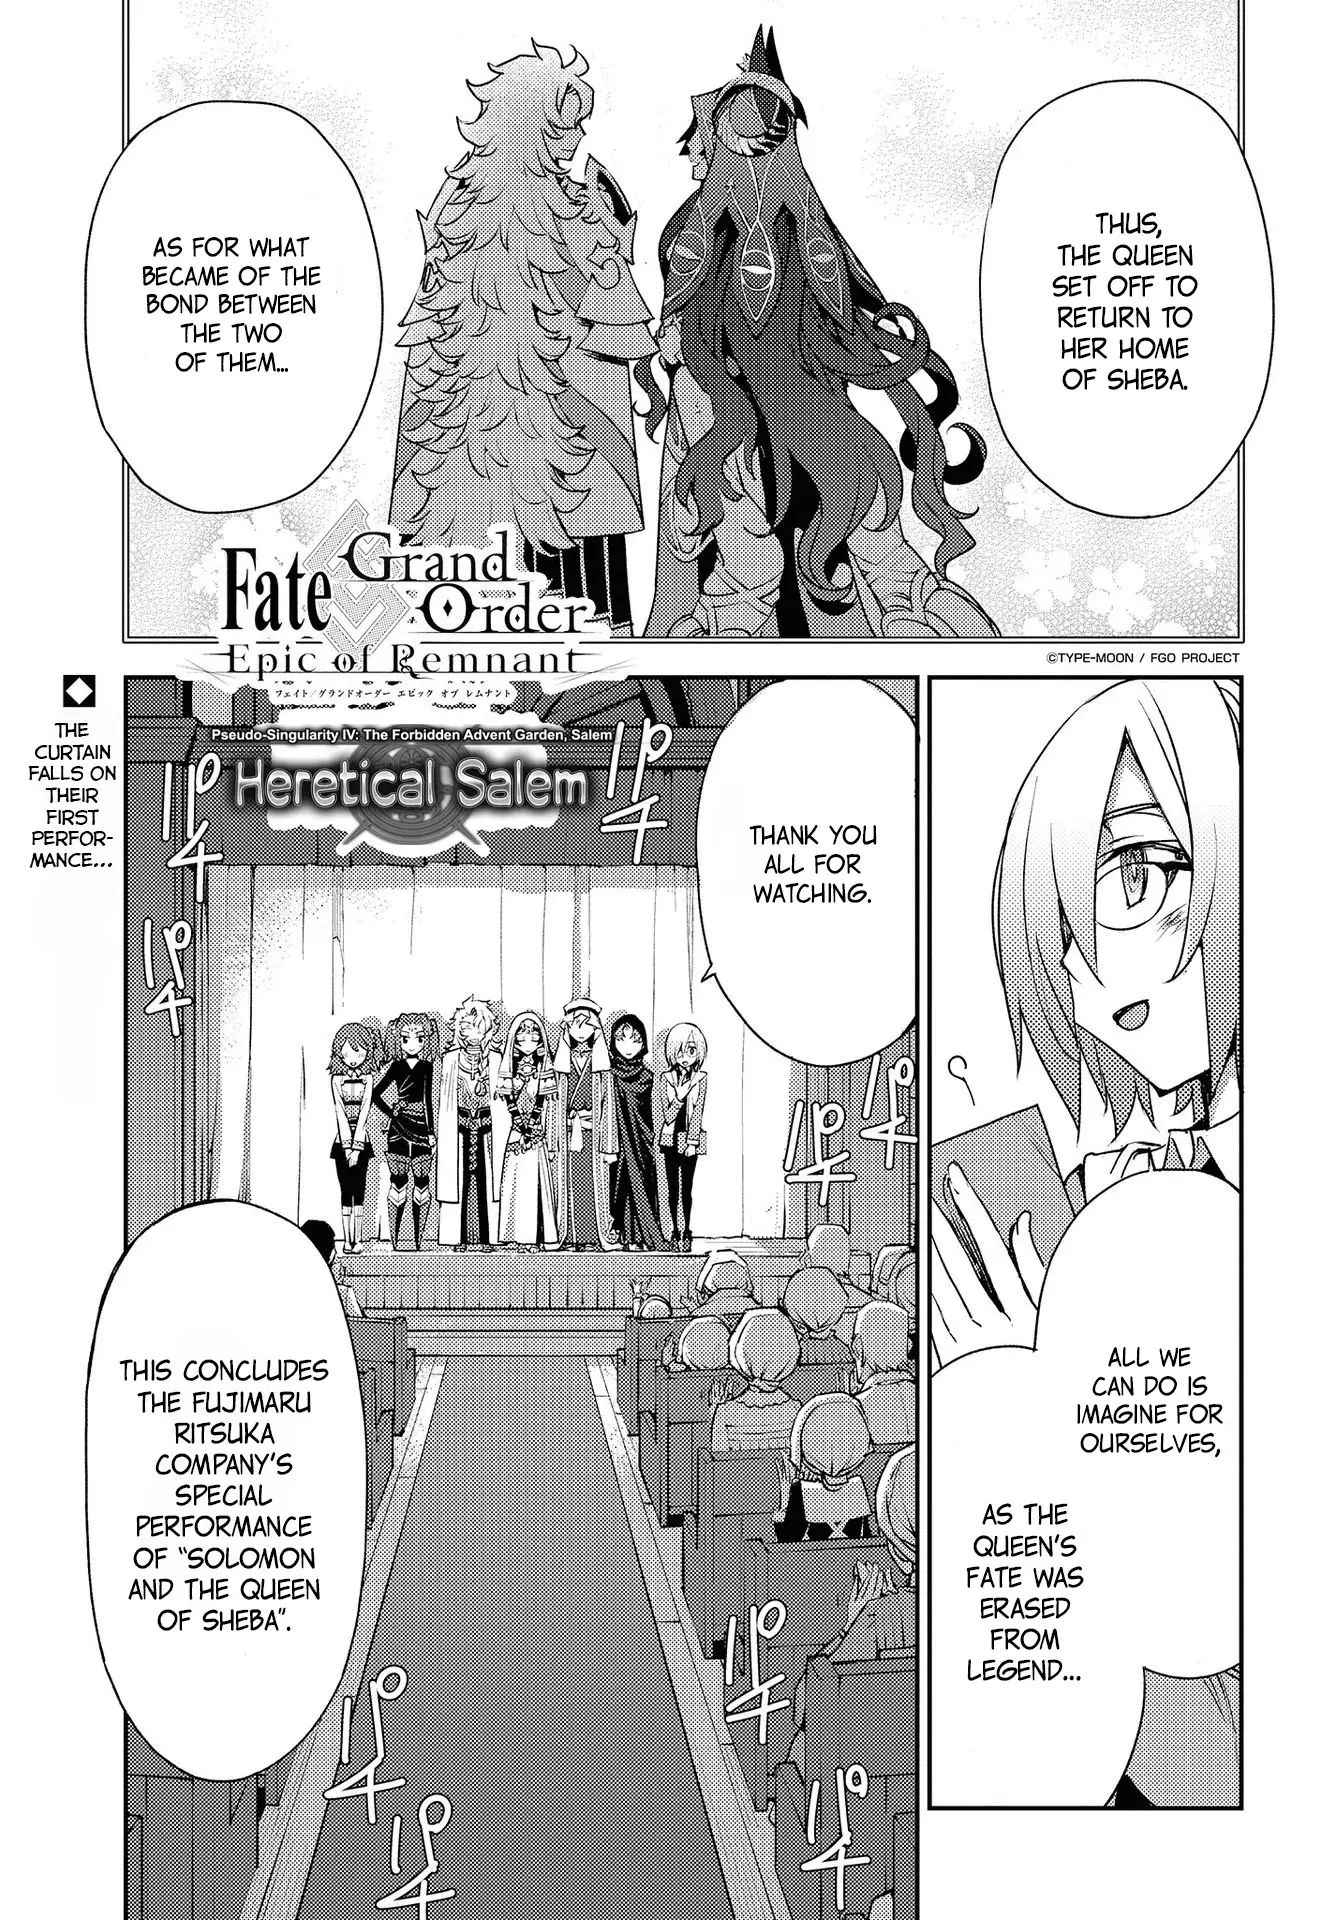 Fate/grand Order: Epic Of Remnant - Subspecies Singularity Iv: Taboo Advent Salem: Salem Of Heresy - 8 page 1